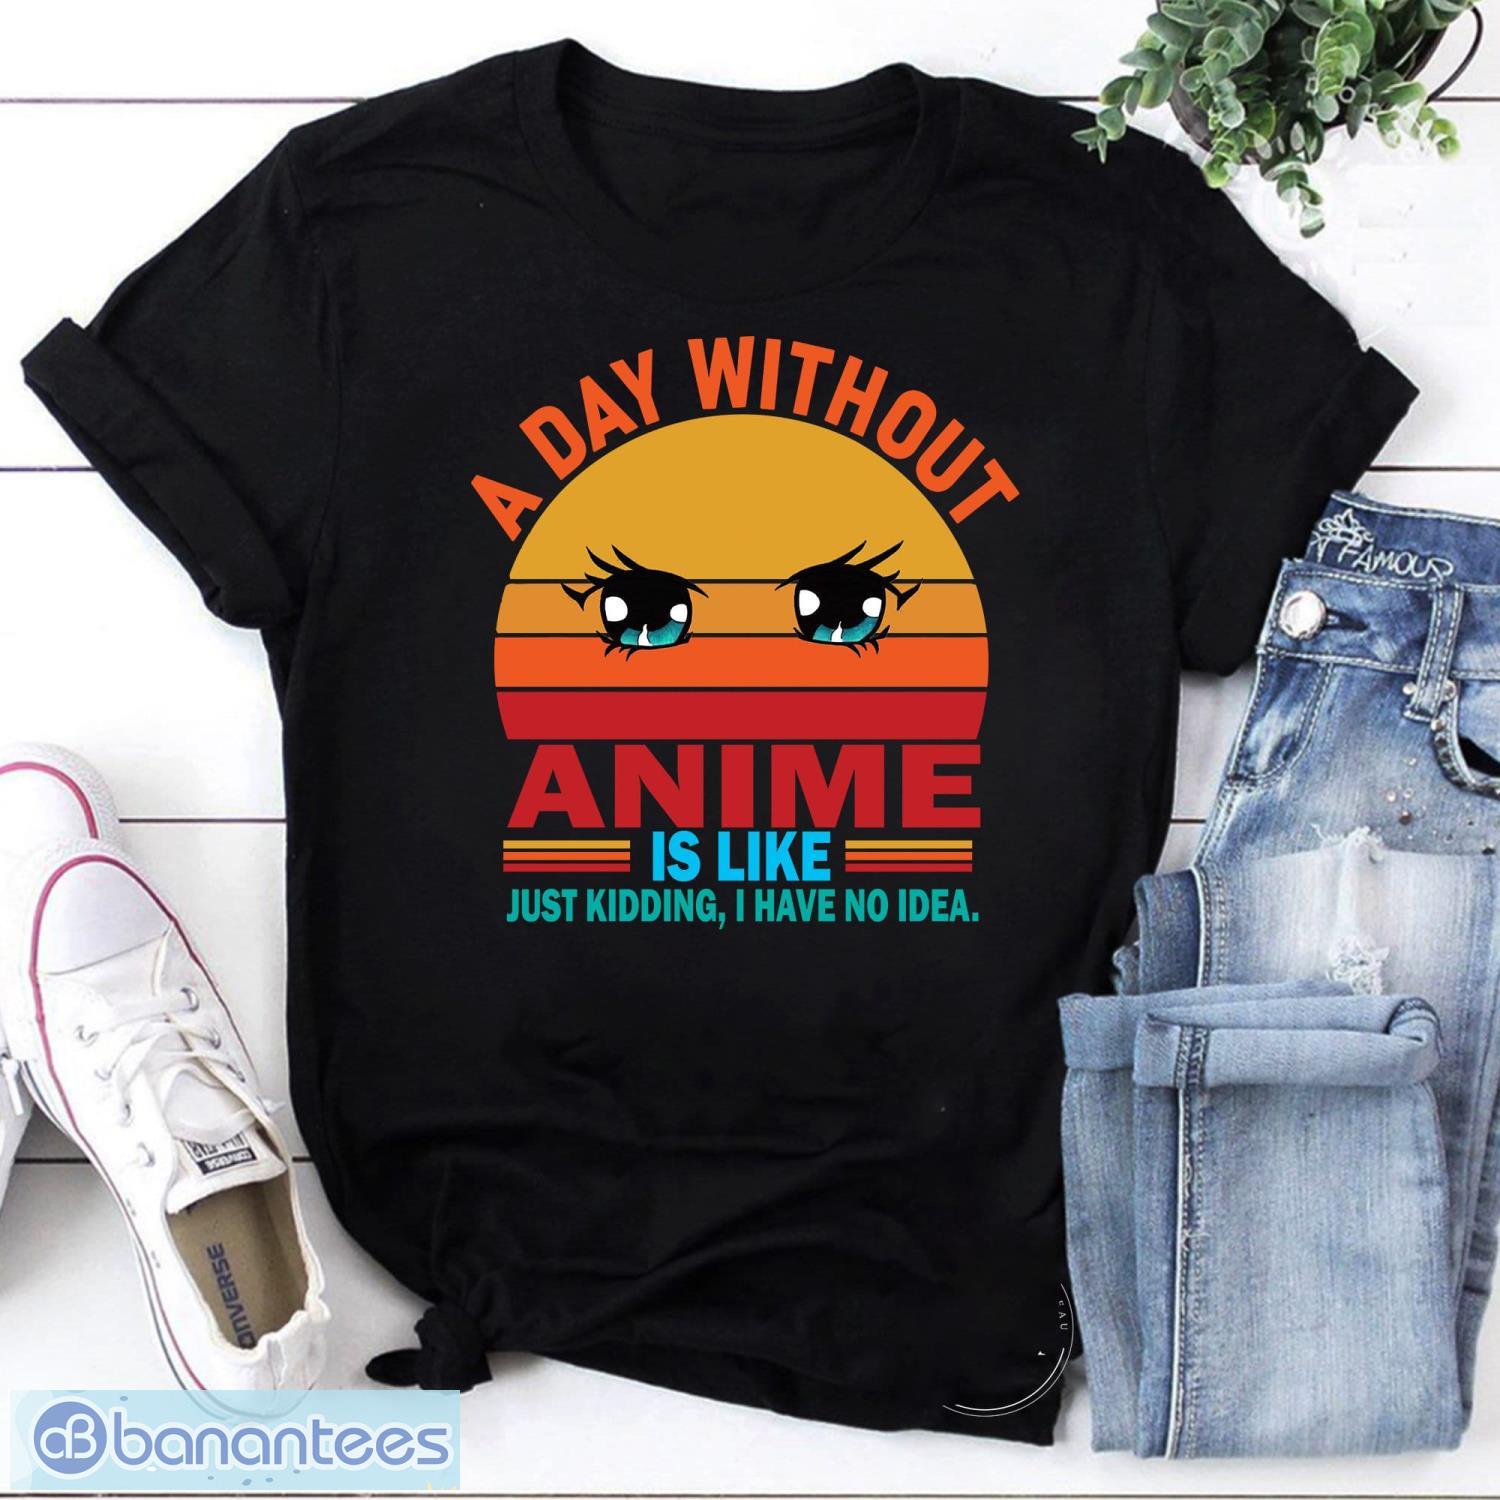 Vintage A Day Without Anime Is Like Just Kidding I Have No Idea for Anime Lover Vintage T-Shirt Funny Anime Shirt Product Photo 1